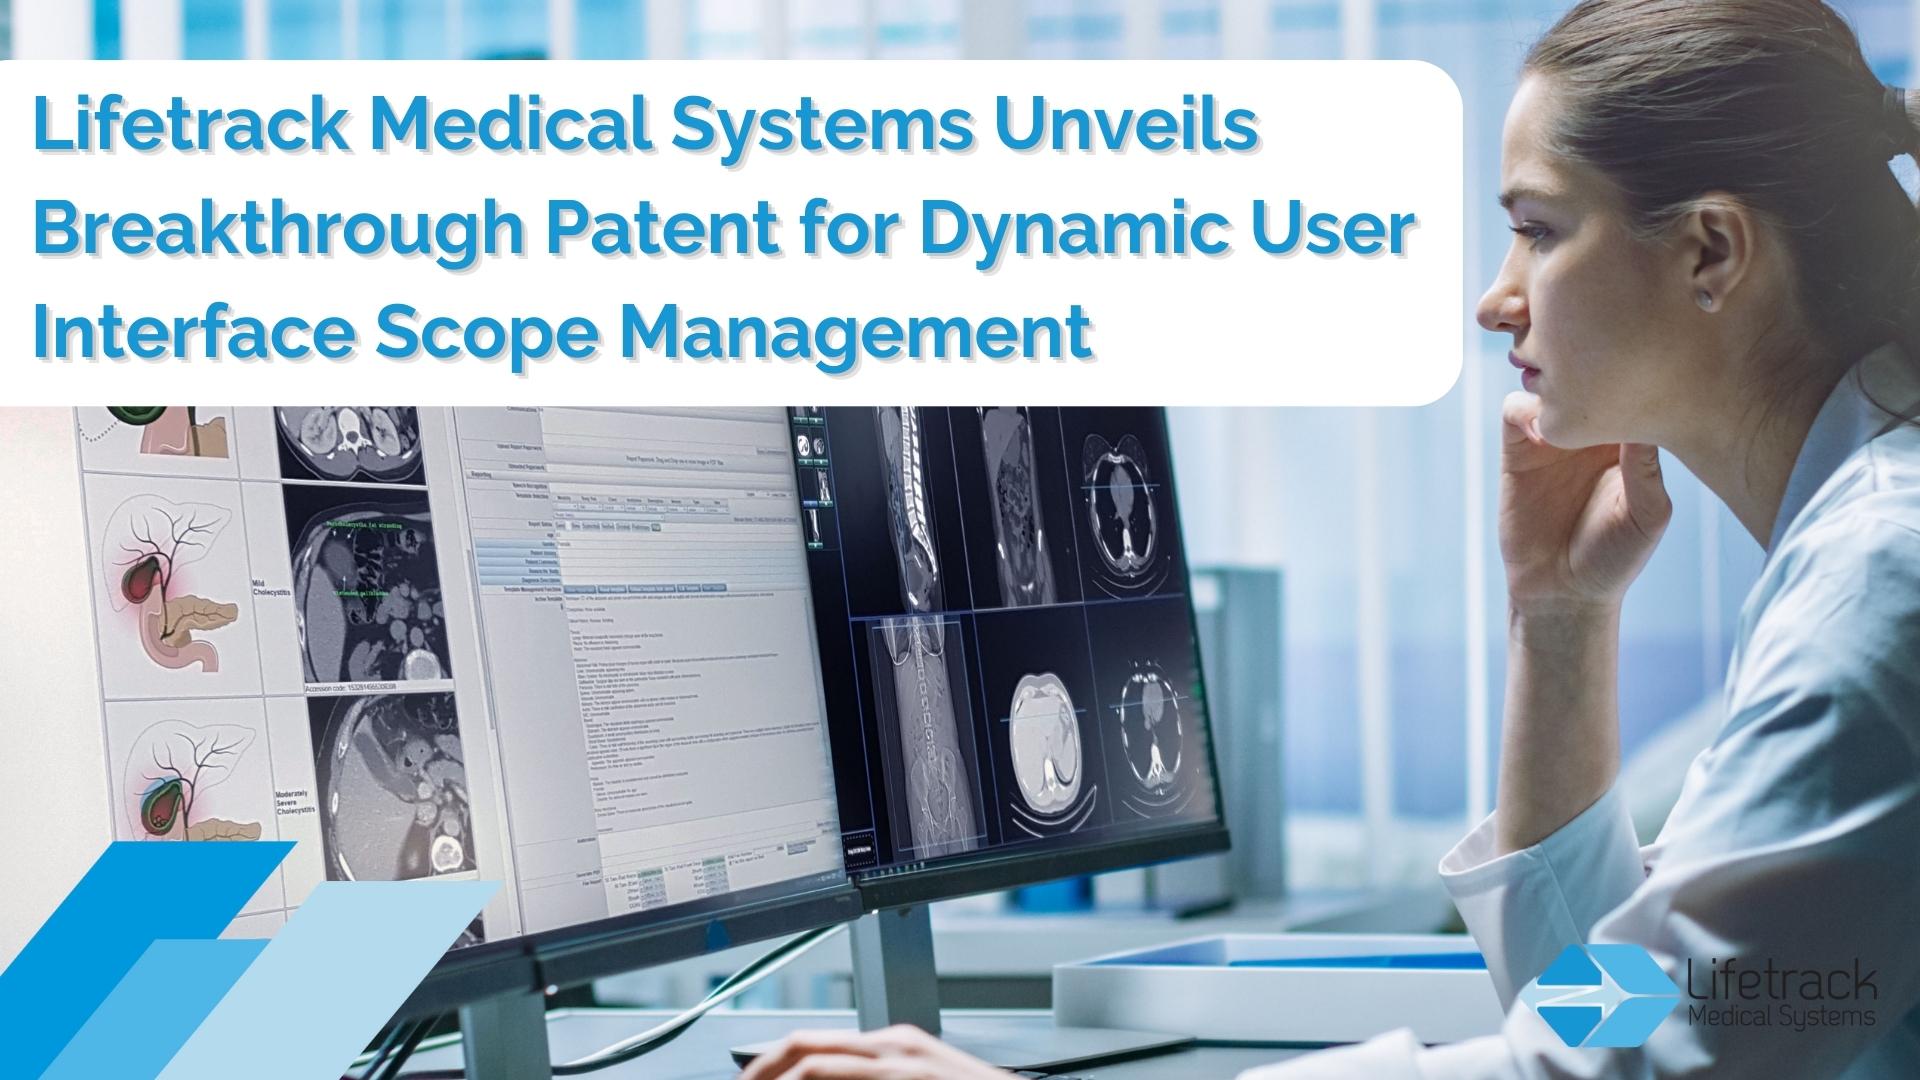 Lifetrack Medical Systems Unveils Breakthrough Patent for Dynamic User Interface Scope Management